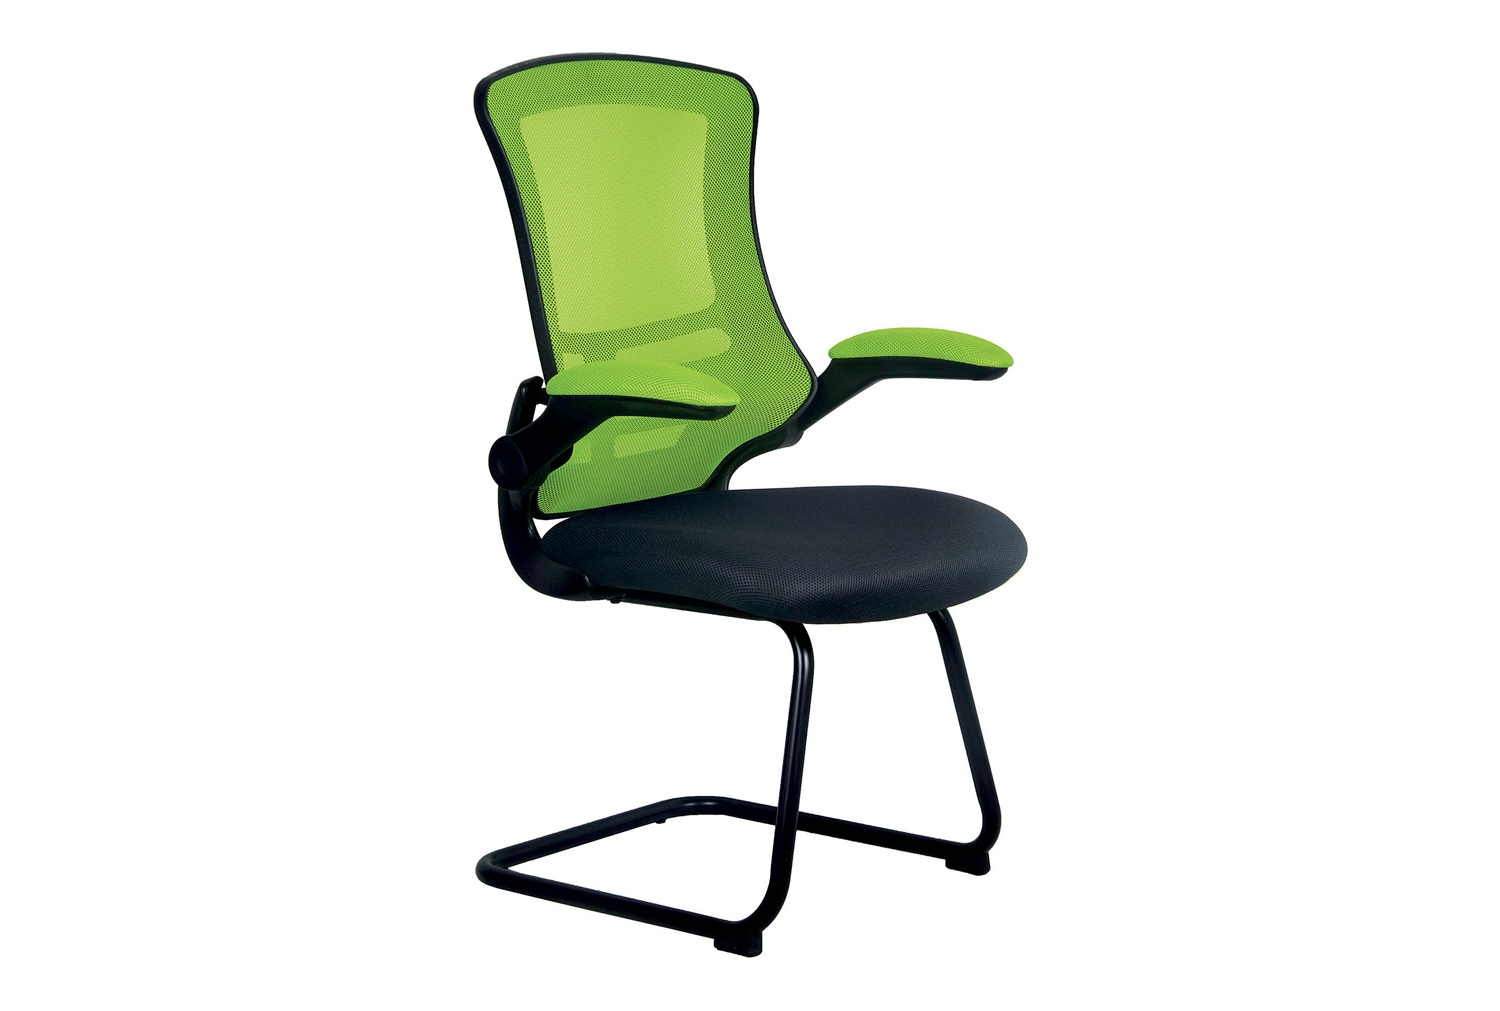 Moon Mesh Back Cantilever Office Chair With Black Frame (Lime Green/Black), Express Delivery